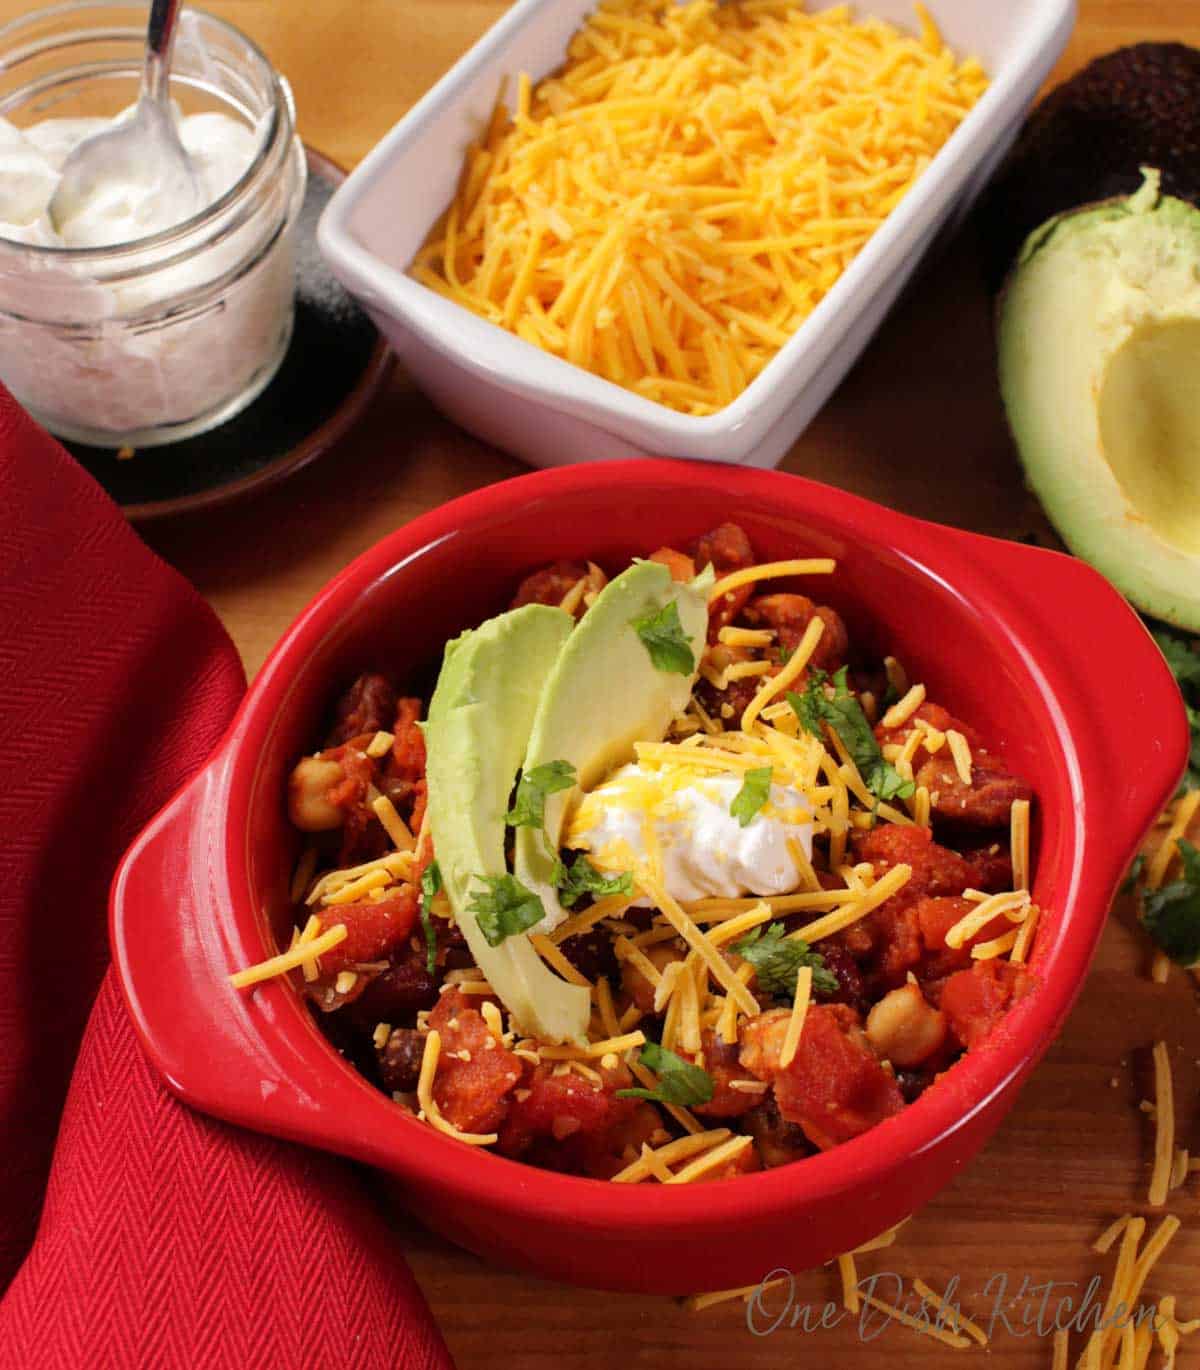 An overhead view of a circular baking dish of vegetarian chili topped with two slices of avocados, shredded cheese, and a dollop of sour cream next to a small jar of sour cream, shredded cheese, and half of an avocado 